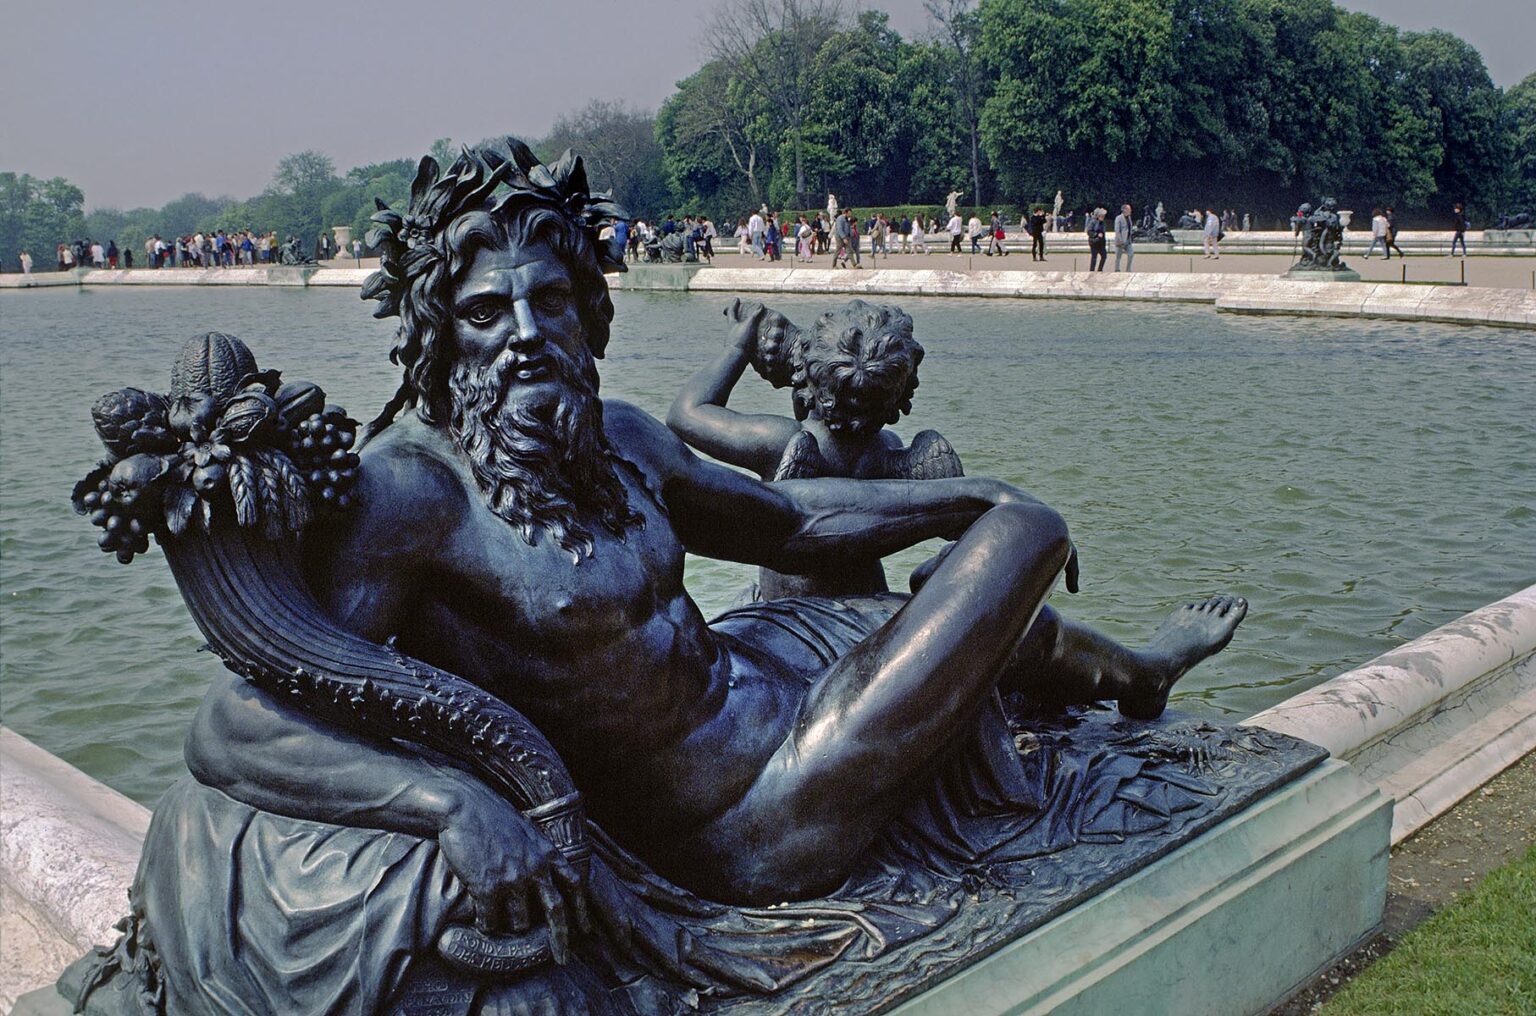 BRONZE STATUE of BACCHUS with CHERUB and a FOUNTAIN of VERSAILLES PALACE, built for LOUIS XIV, the SUN KING - VERSAILLES, FRANCE